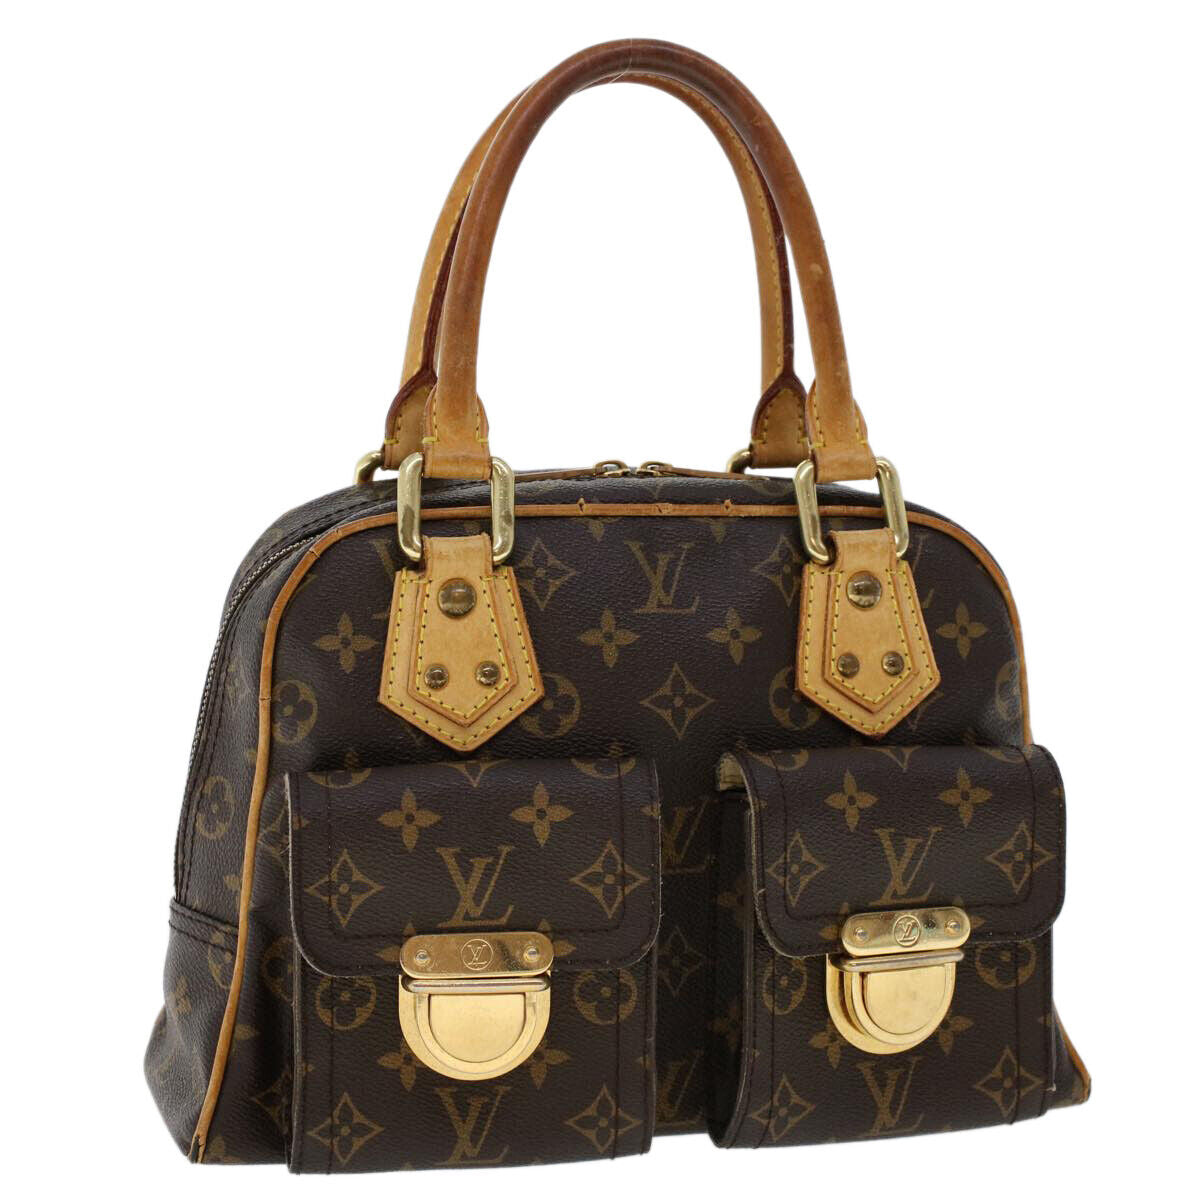 LOUIS VUITTON MANHATTAN PM BAG, monogram leather with leather